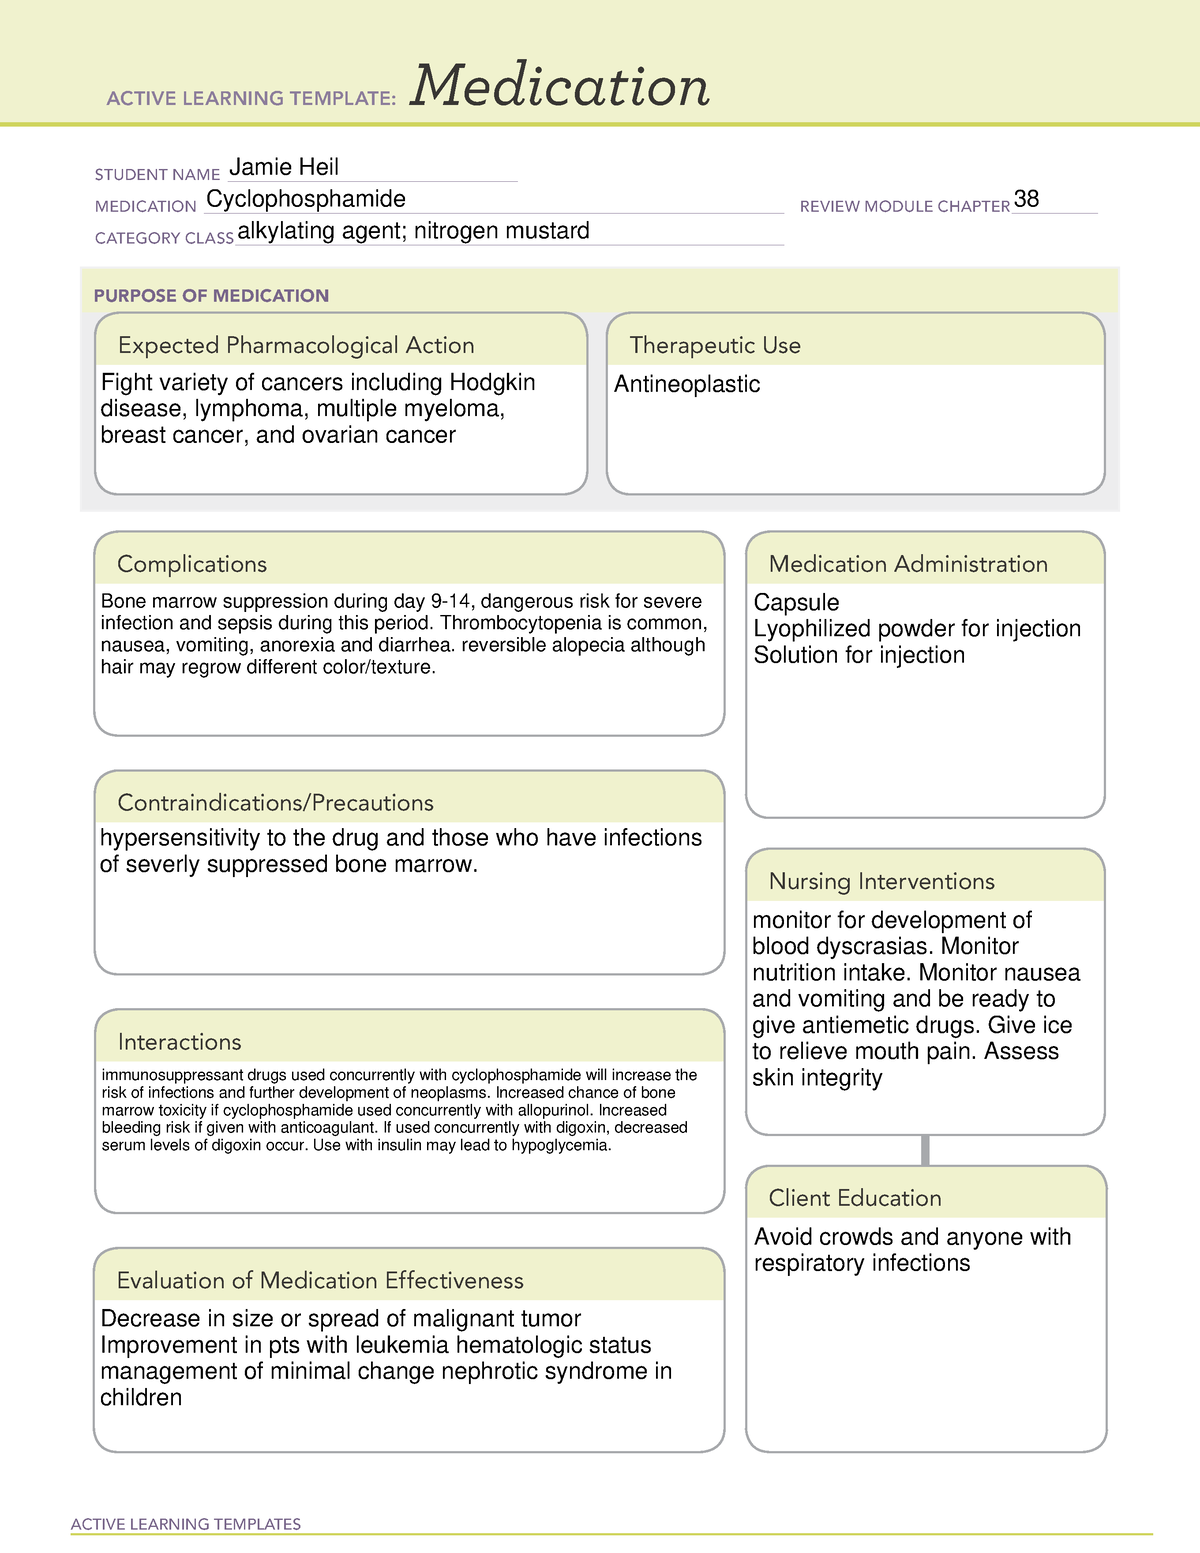 Cyclophosphamide - Medication Card - ACTIVE LEARNING TEMPLATES ...